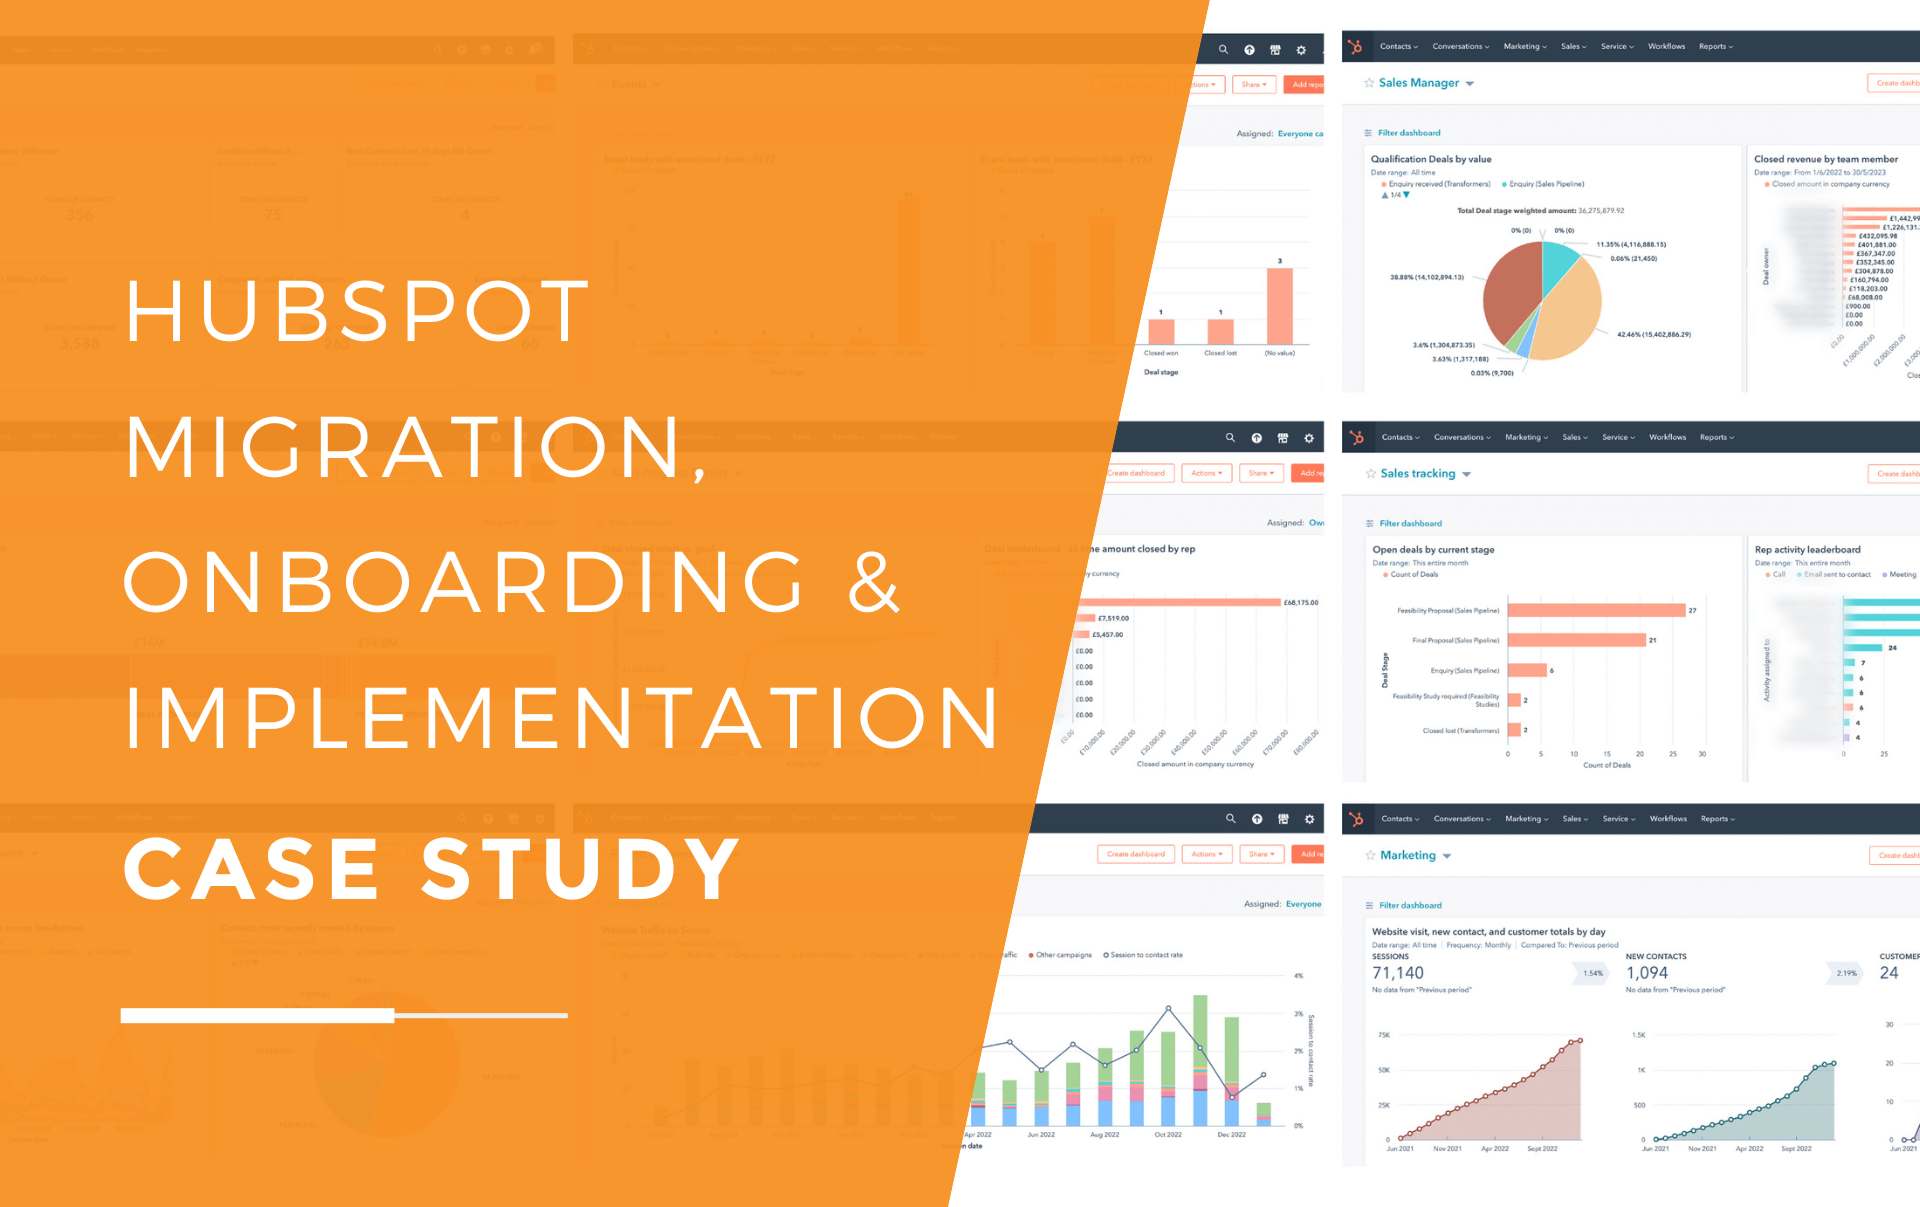 HubSpot Custom Dashboards featured data from JDR's Case Study client